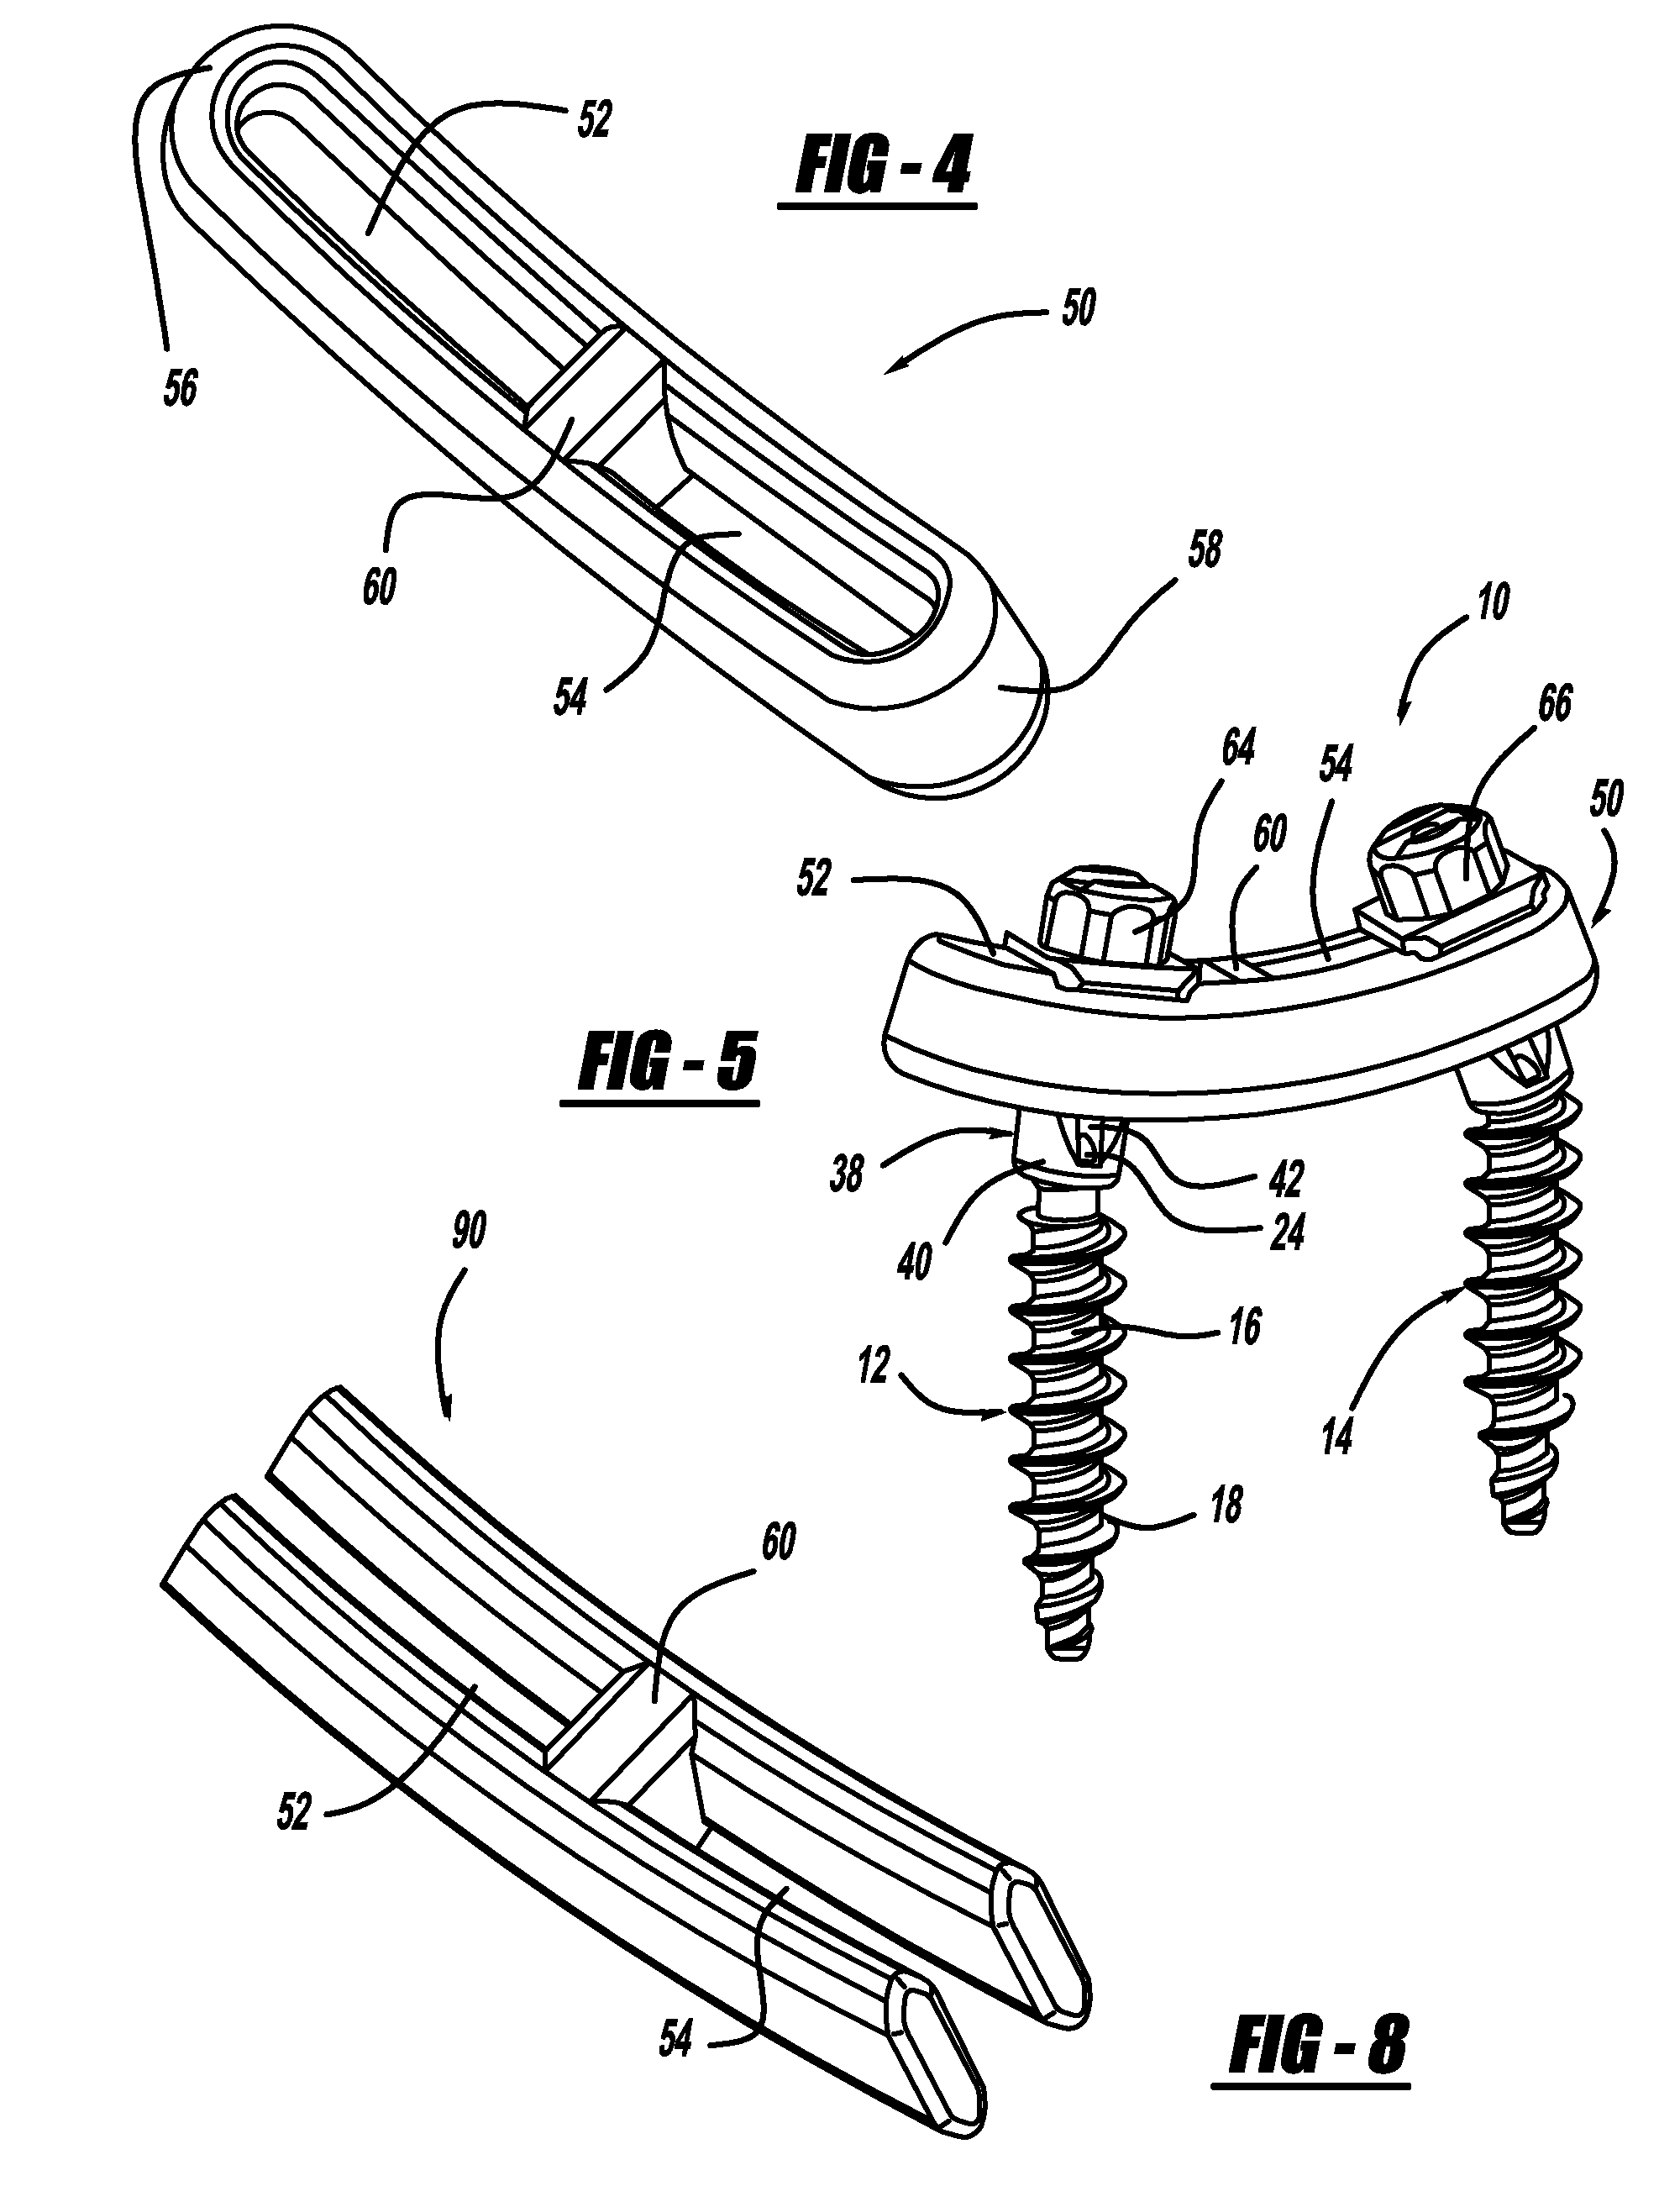 Pedicle Screw and Rod System